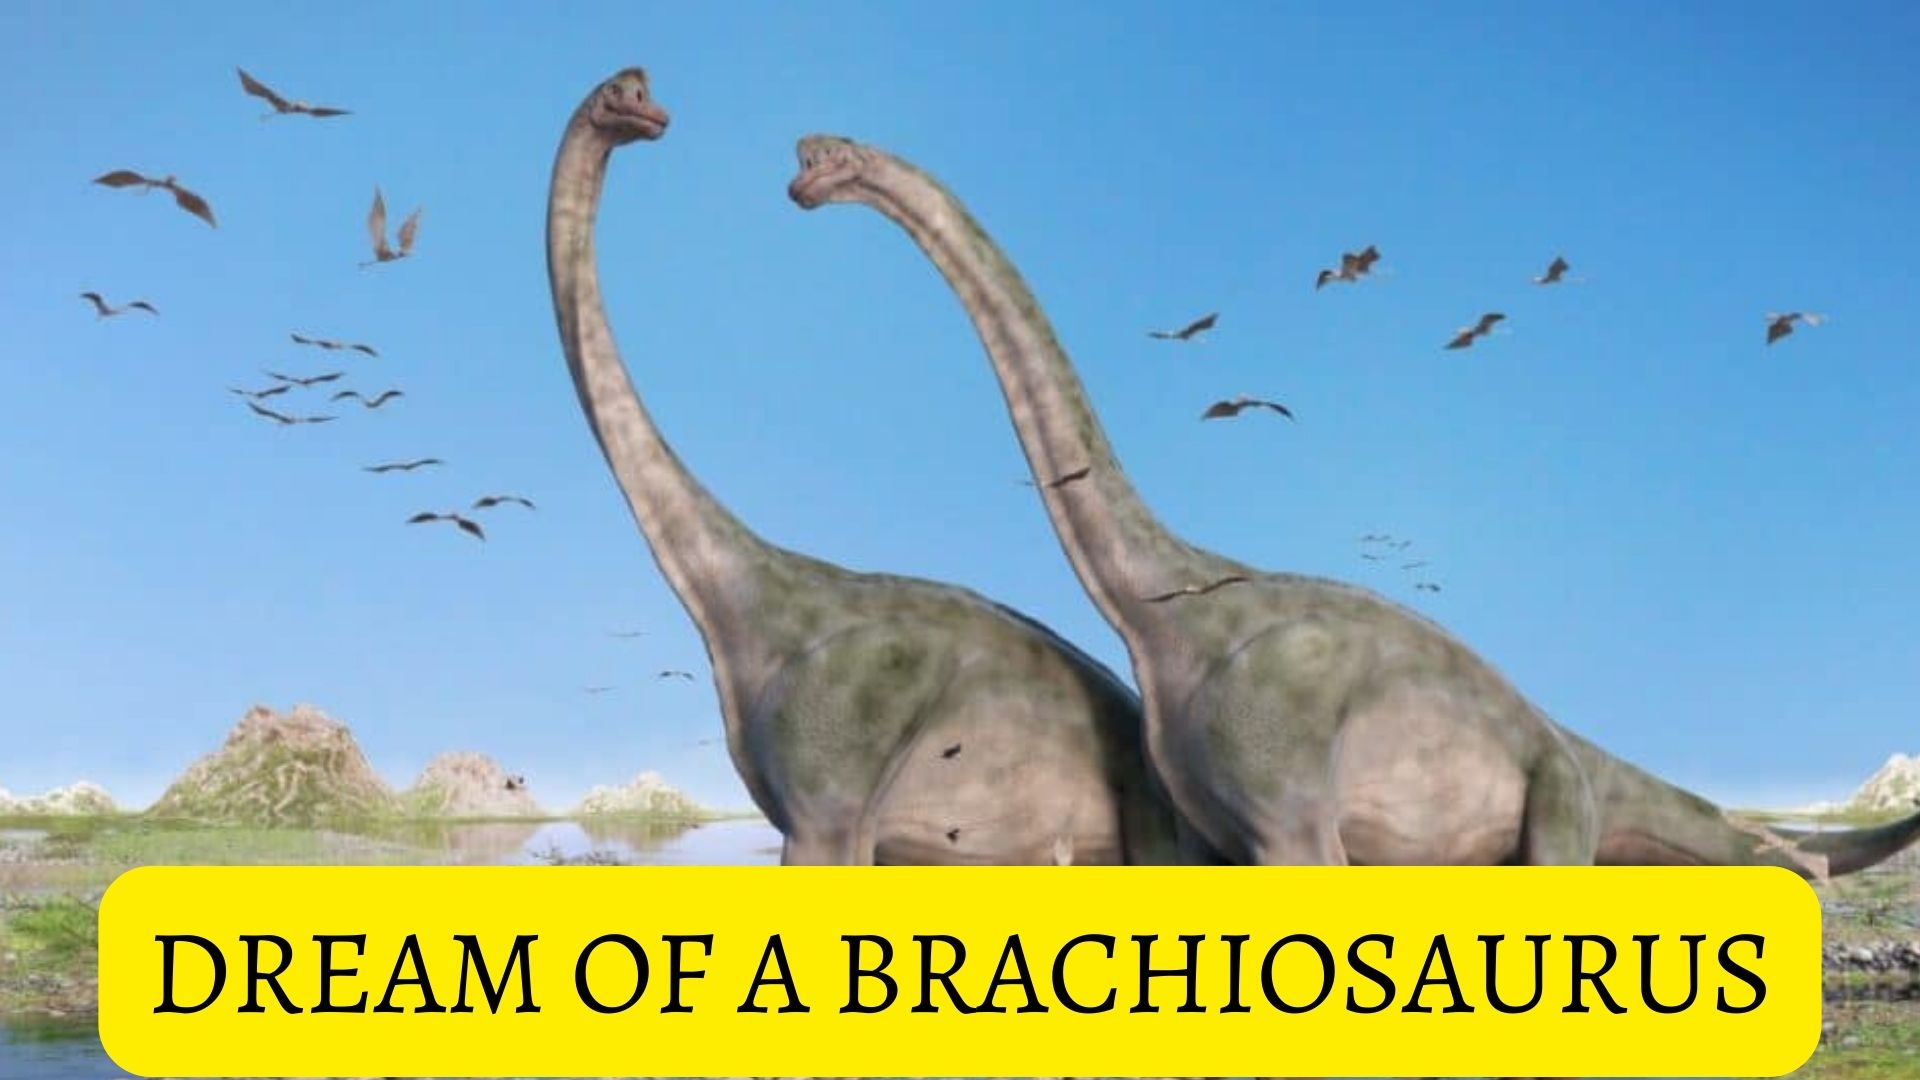 Dream Of A Brachiosaurus - Involves Fear Of Appearing Too Insignificant